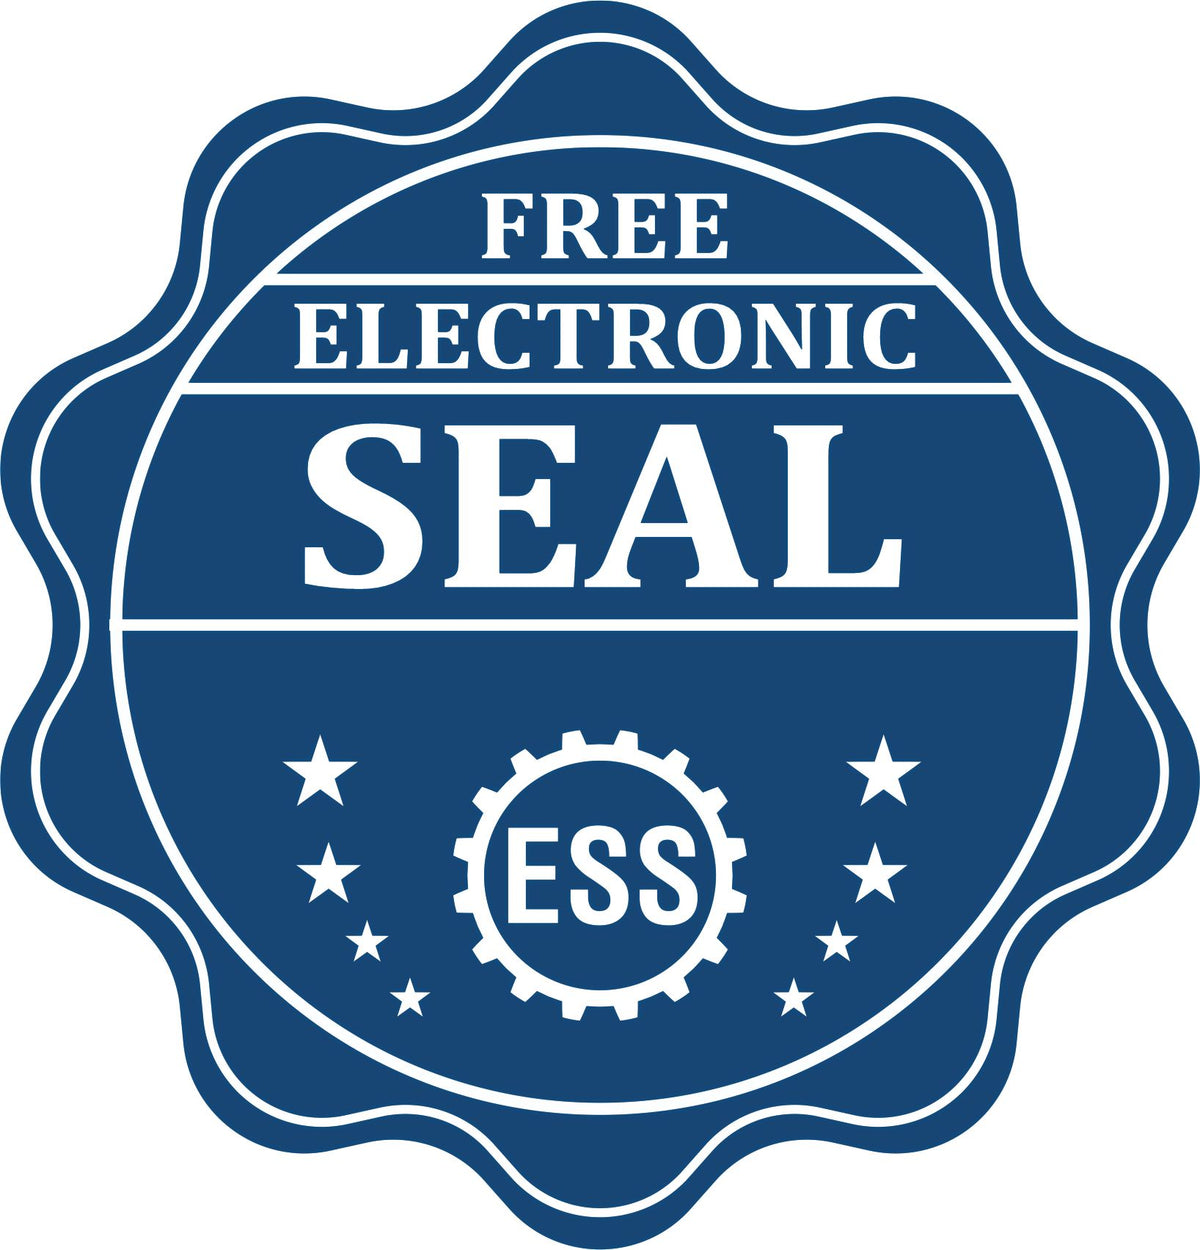 A badge showing a free electronic seal for the Handheld South Dakota Professional Engineer Embosser with stars and the ESS gear on the emblem.